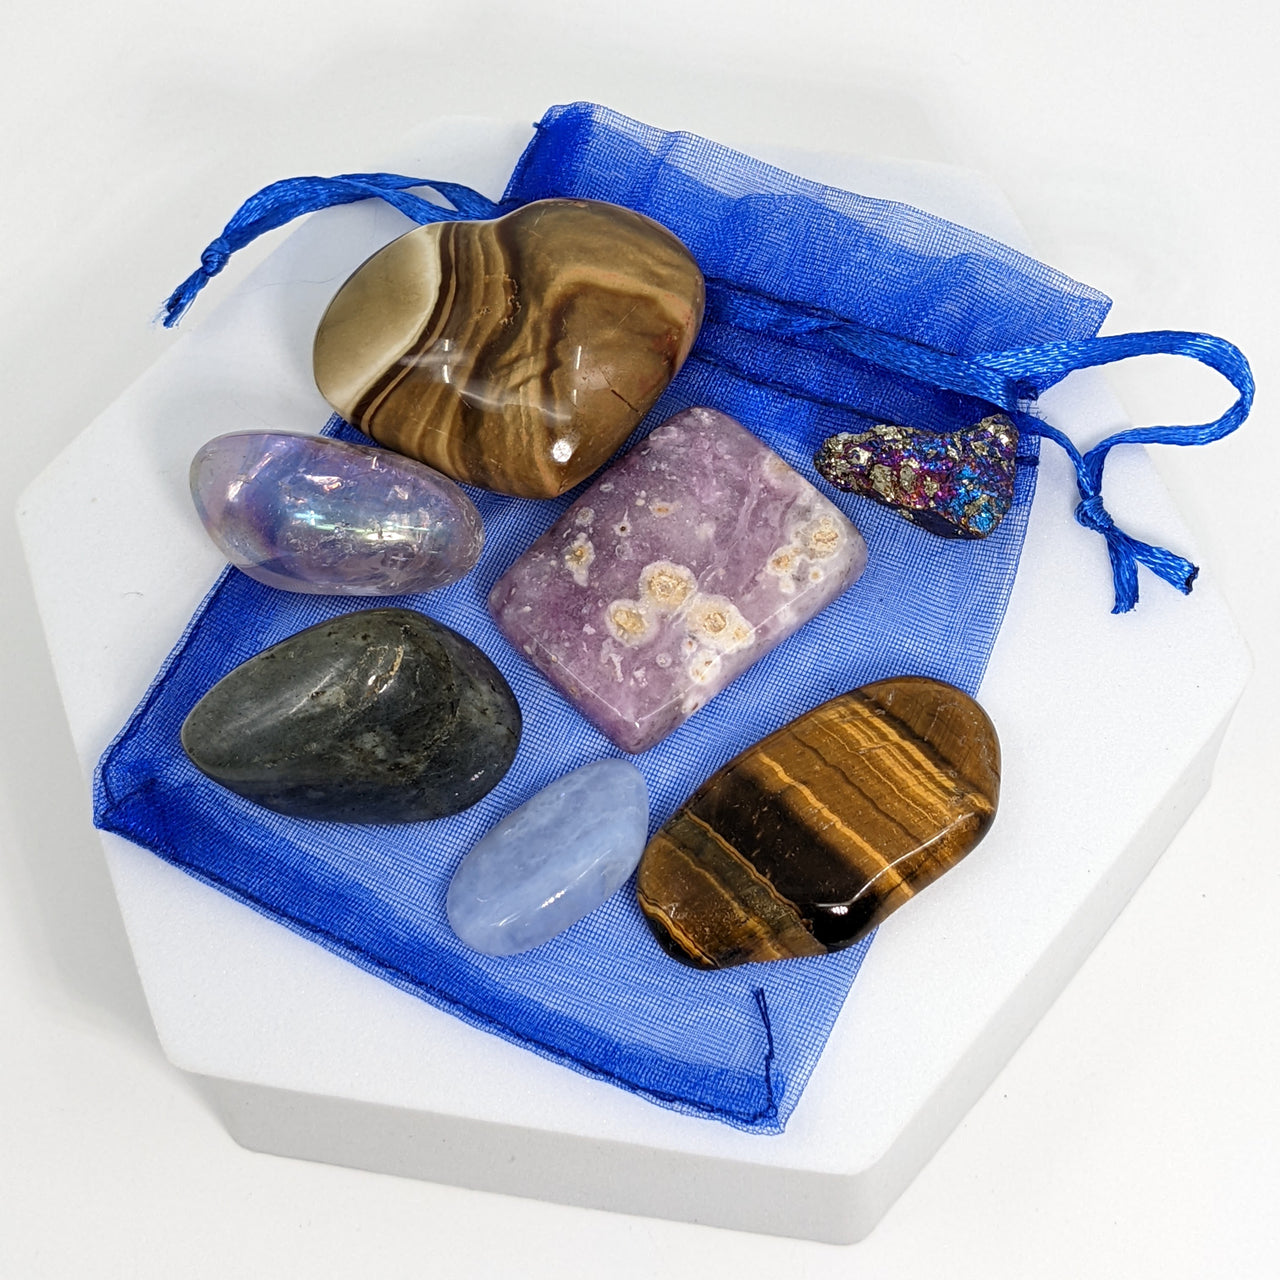 1 Mystery Bag w/Crystals ($30 Value) (approx. 90g) #SK8715